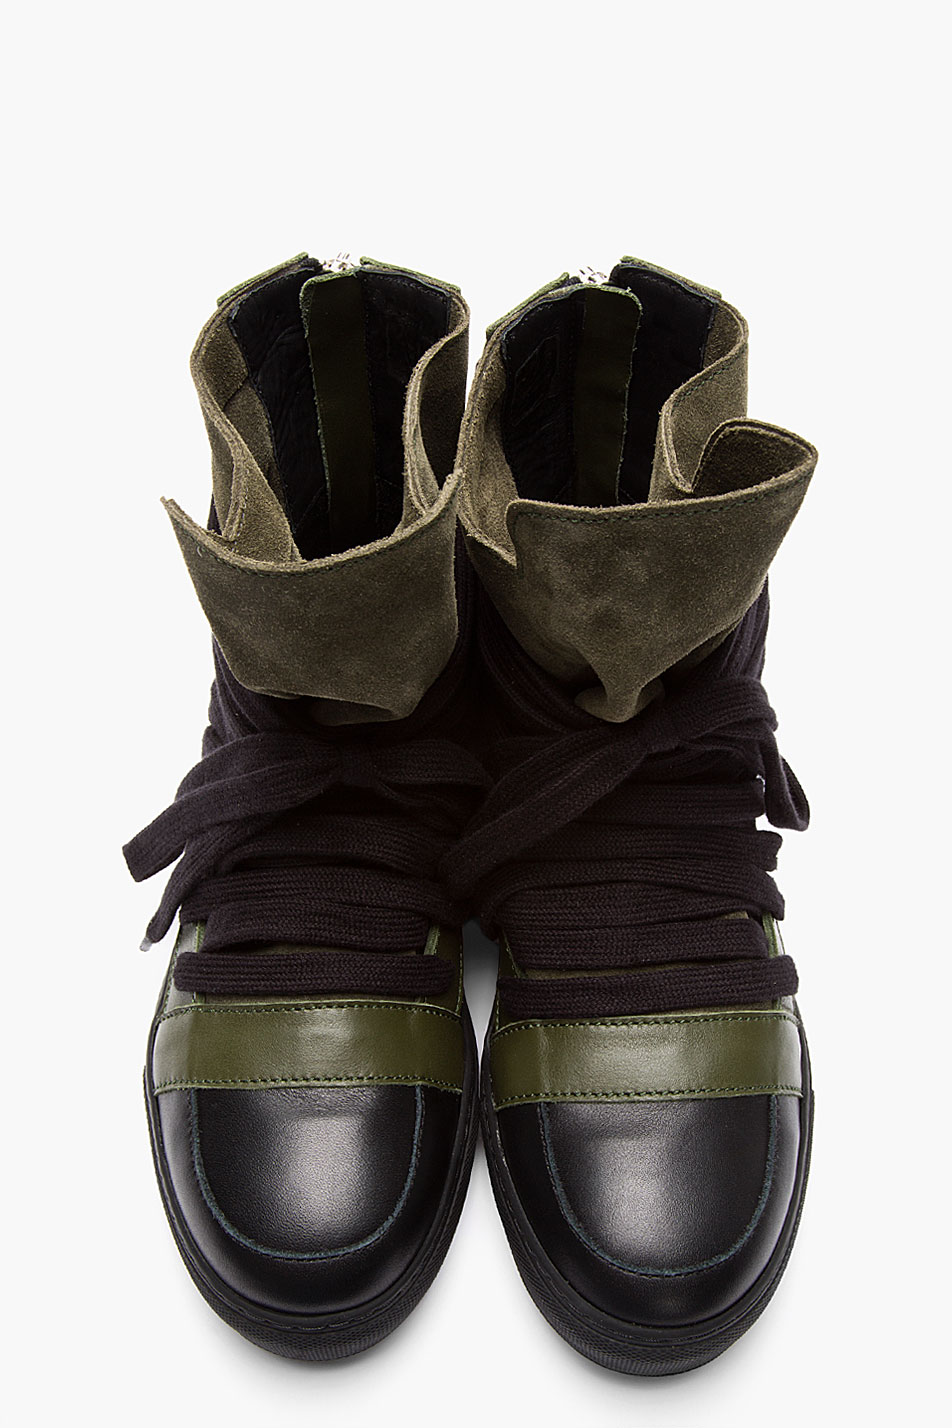 Lyst - Kris Van Assche Olive Leather Extended-lace High-top Sneakers in ...